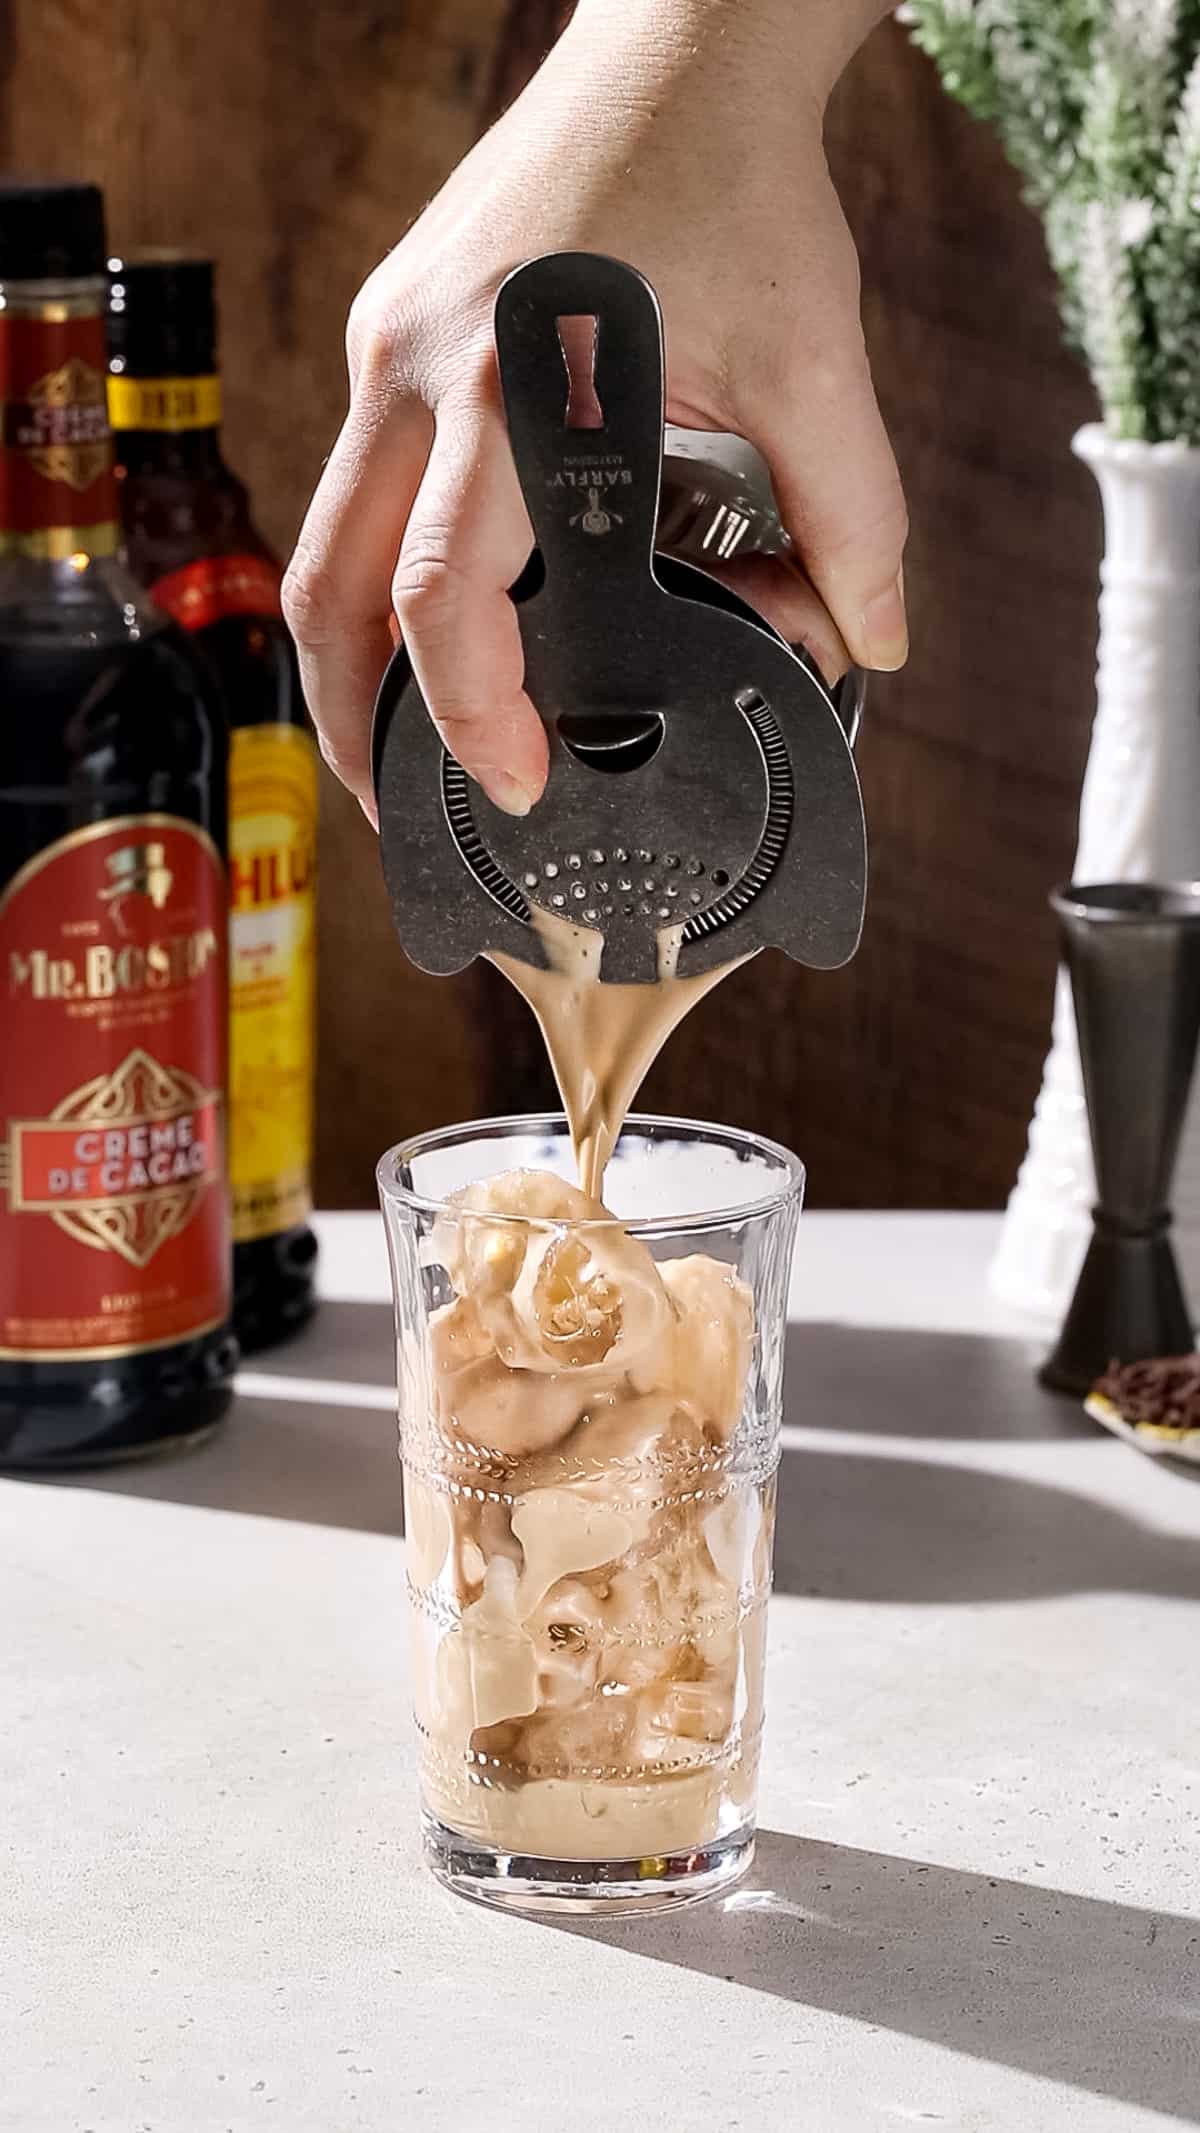 Hand straining a light brown liquid into a tall cocktail glass filled with ice.